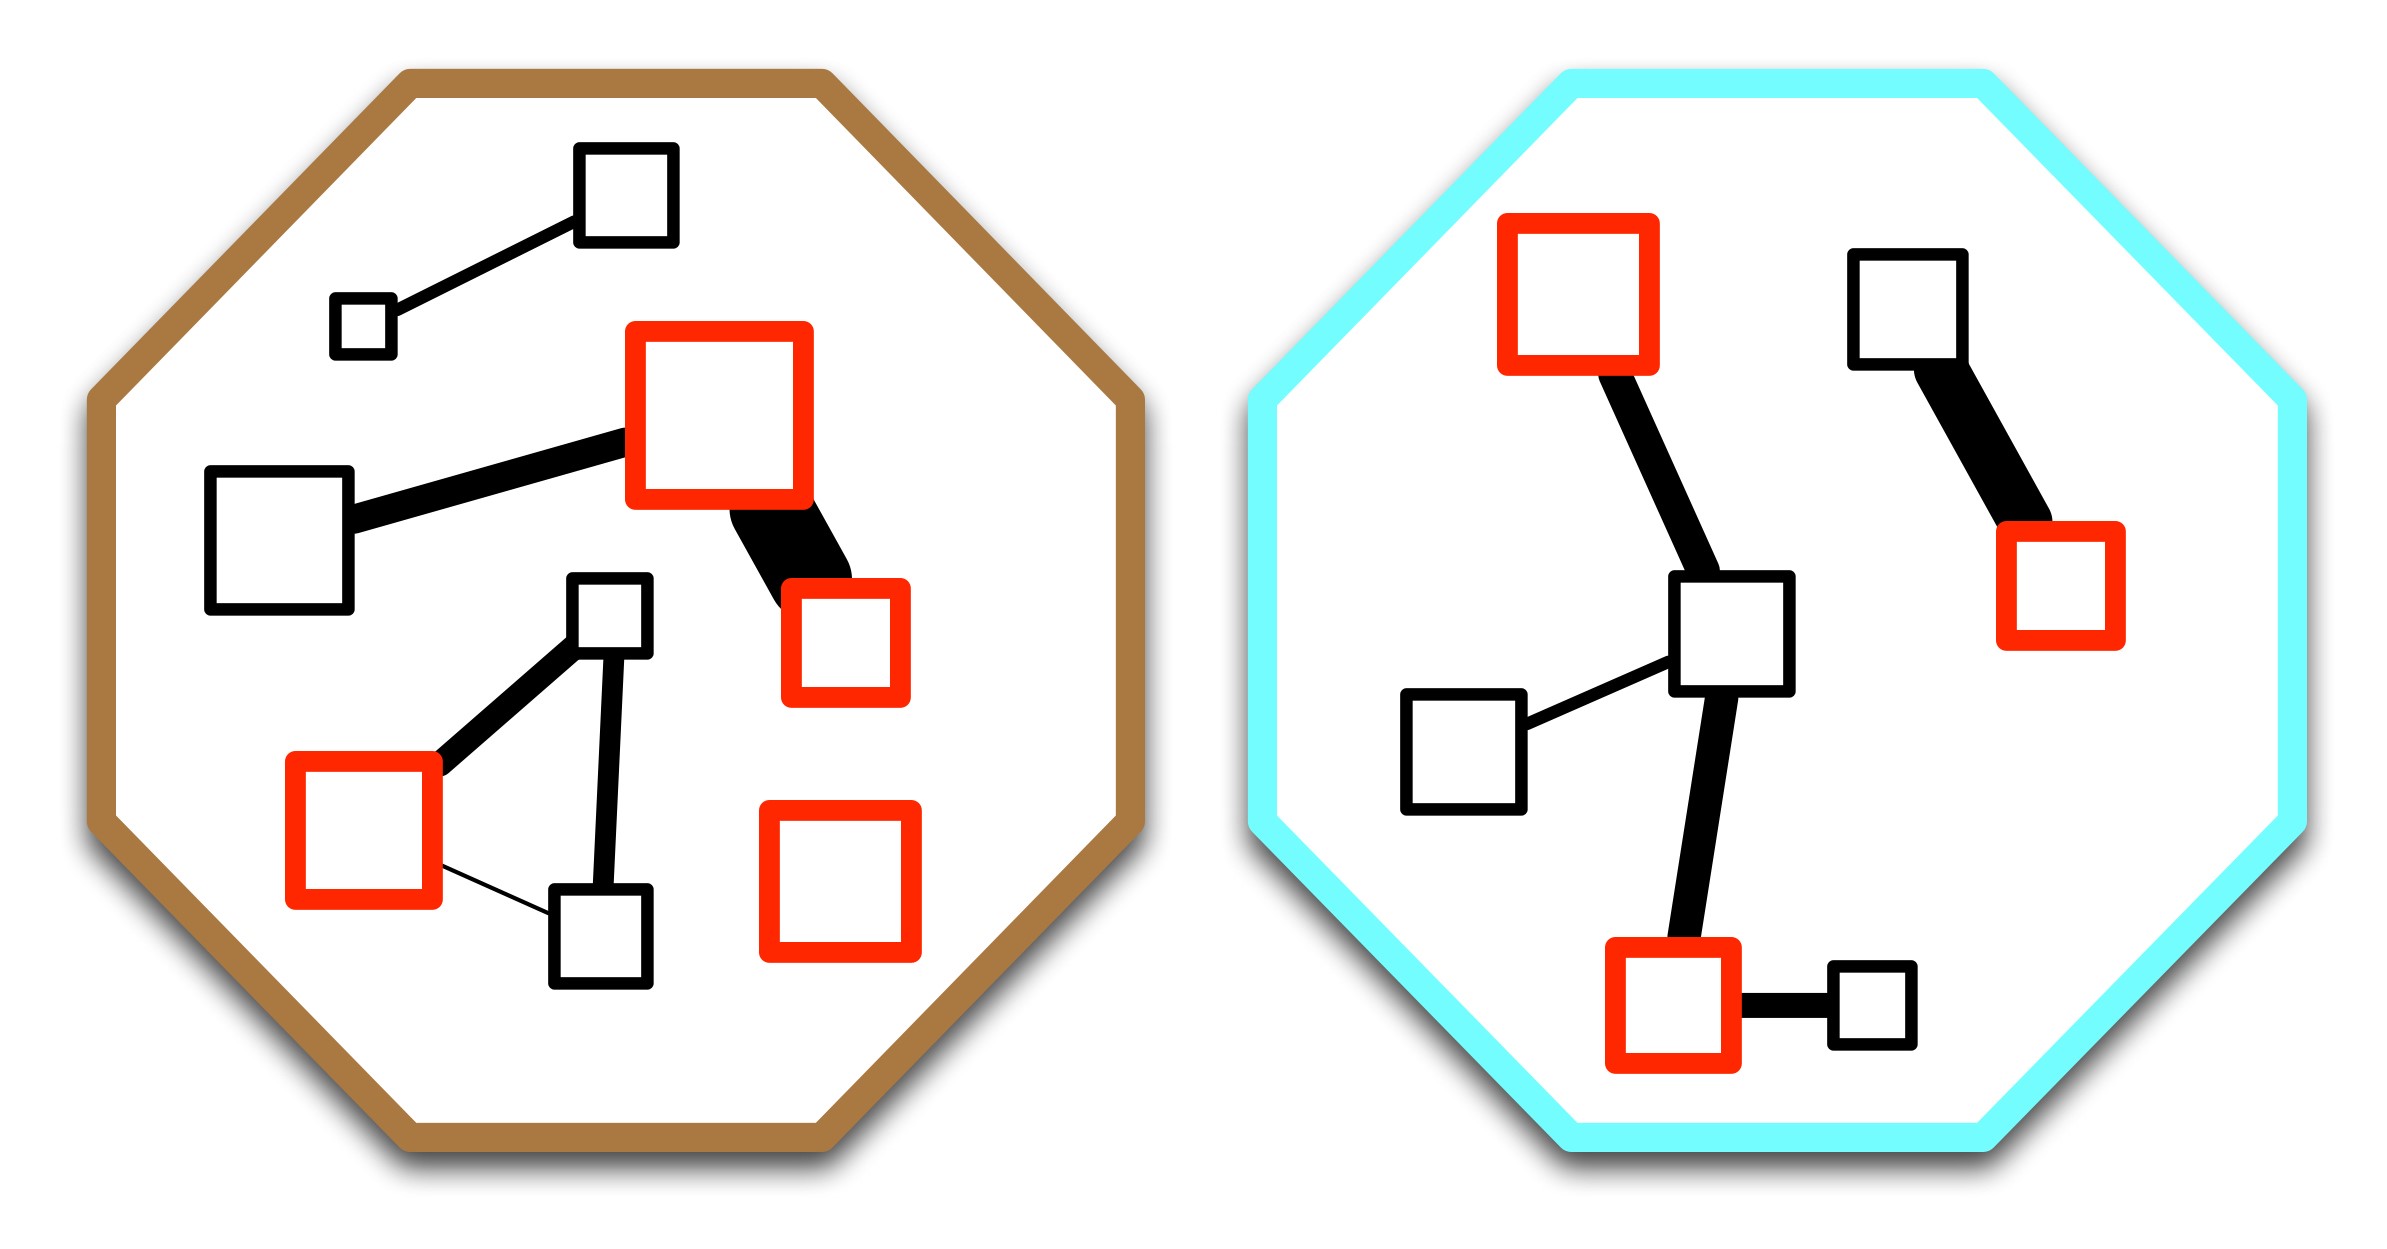 diagram of networks inside two small octagons